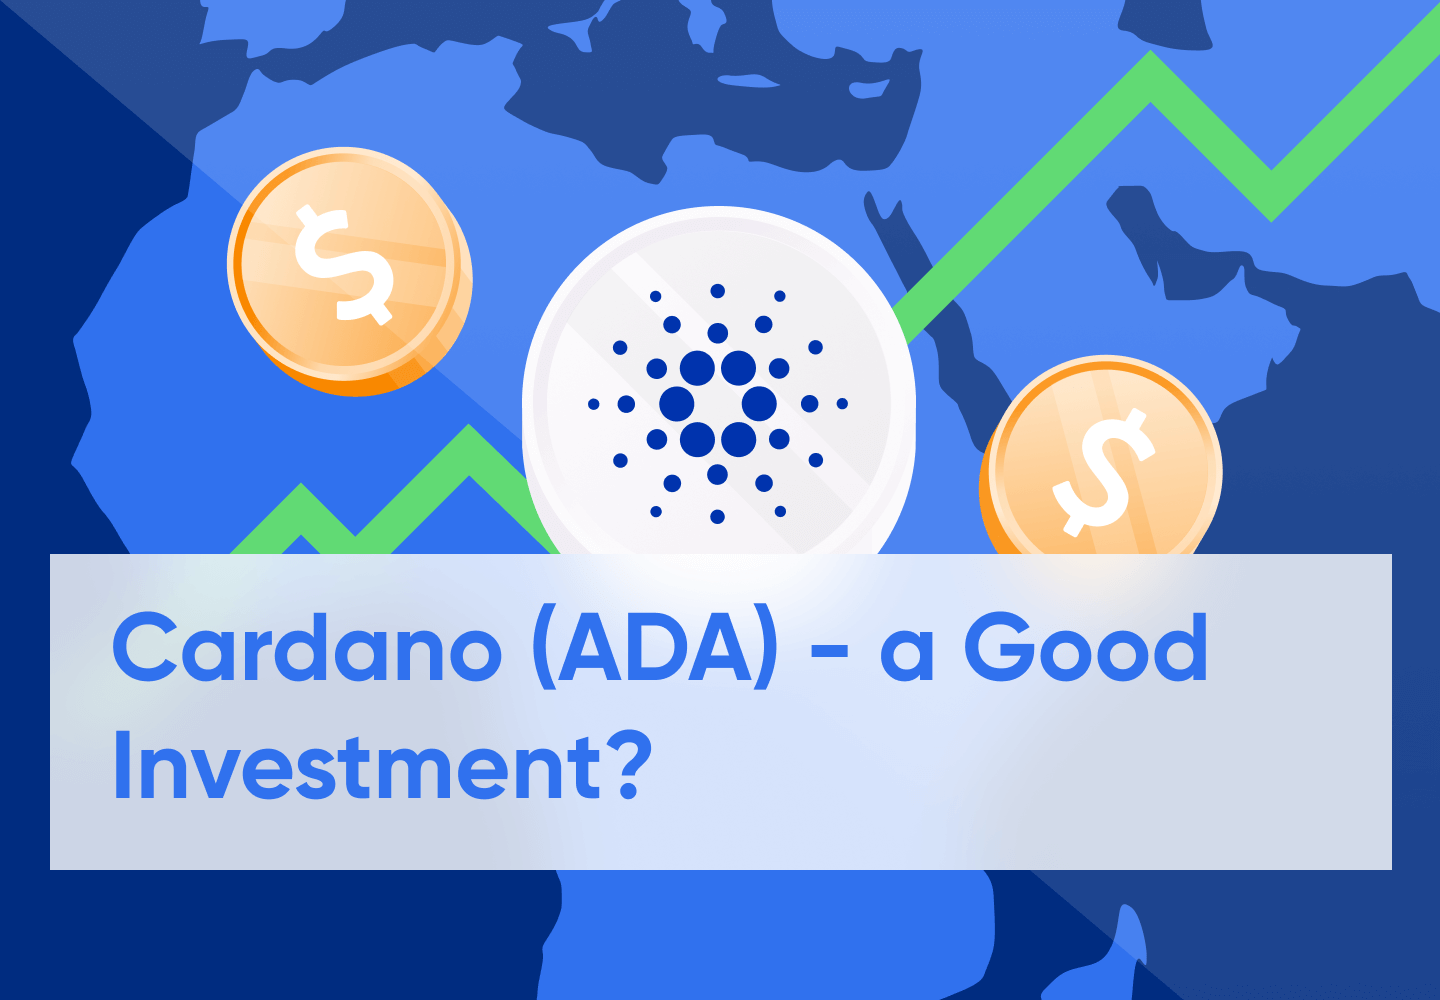 Is Cardano (ADA) A Good Investment?